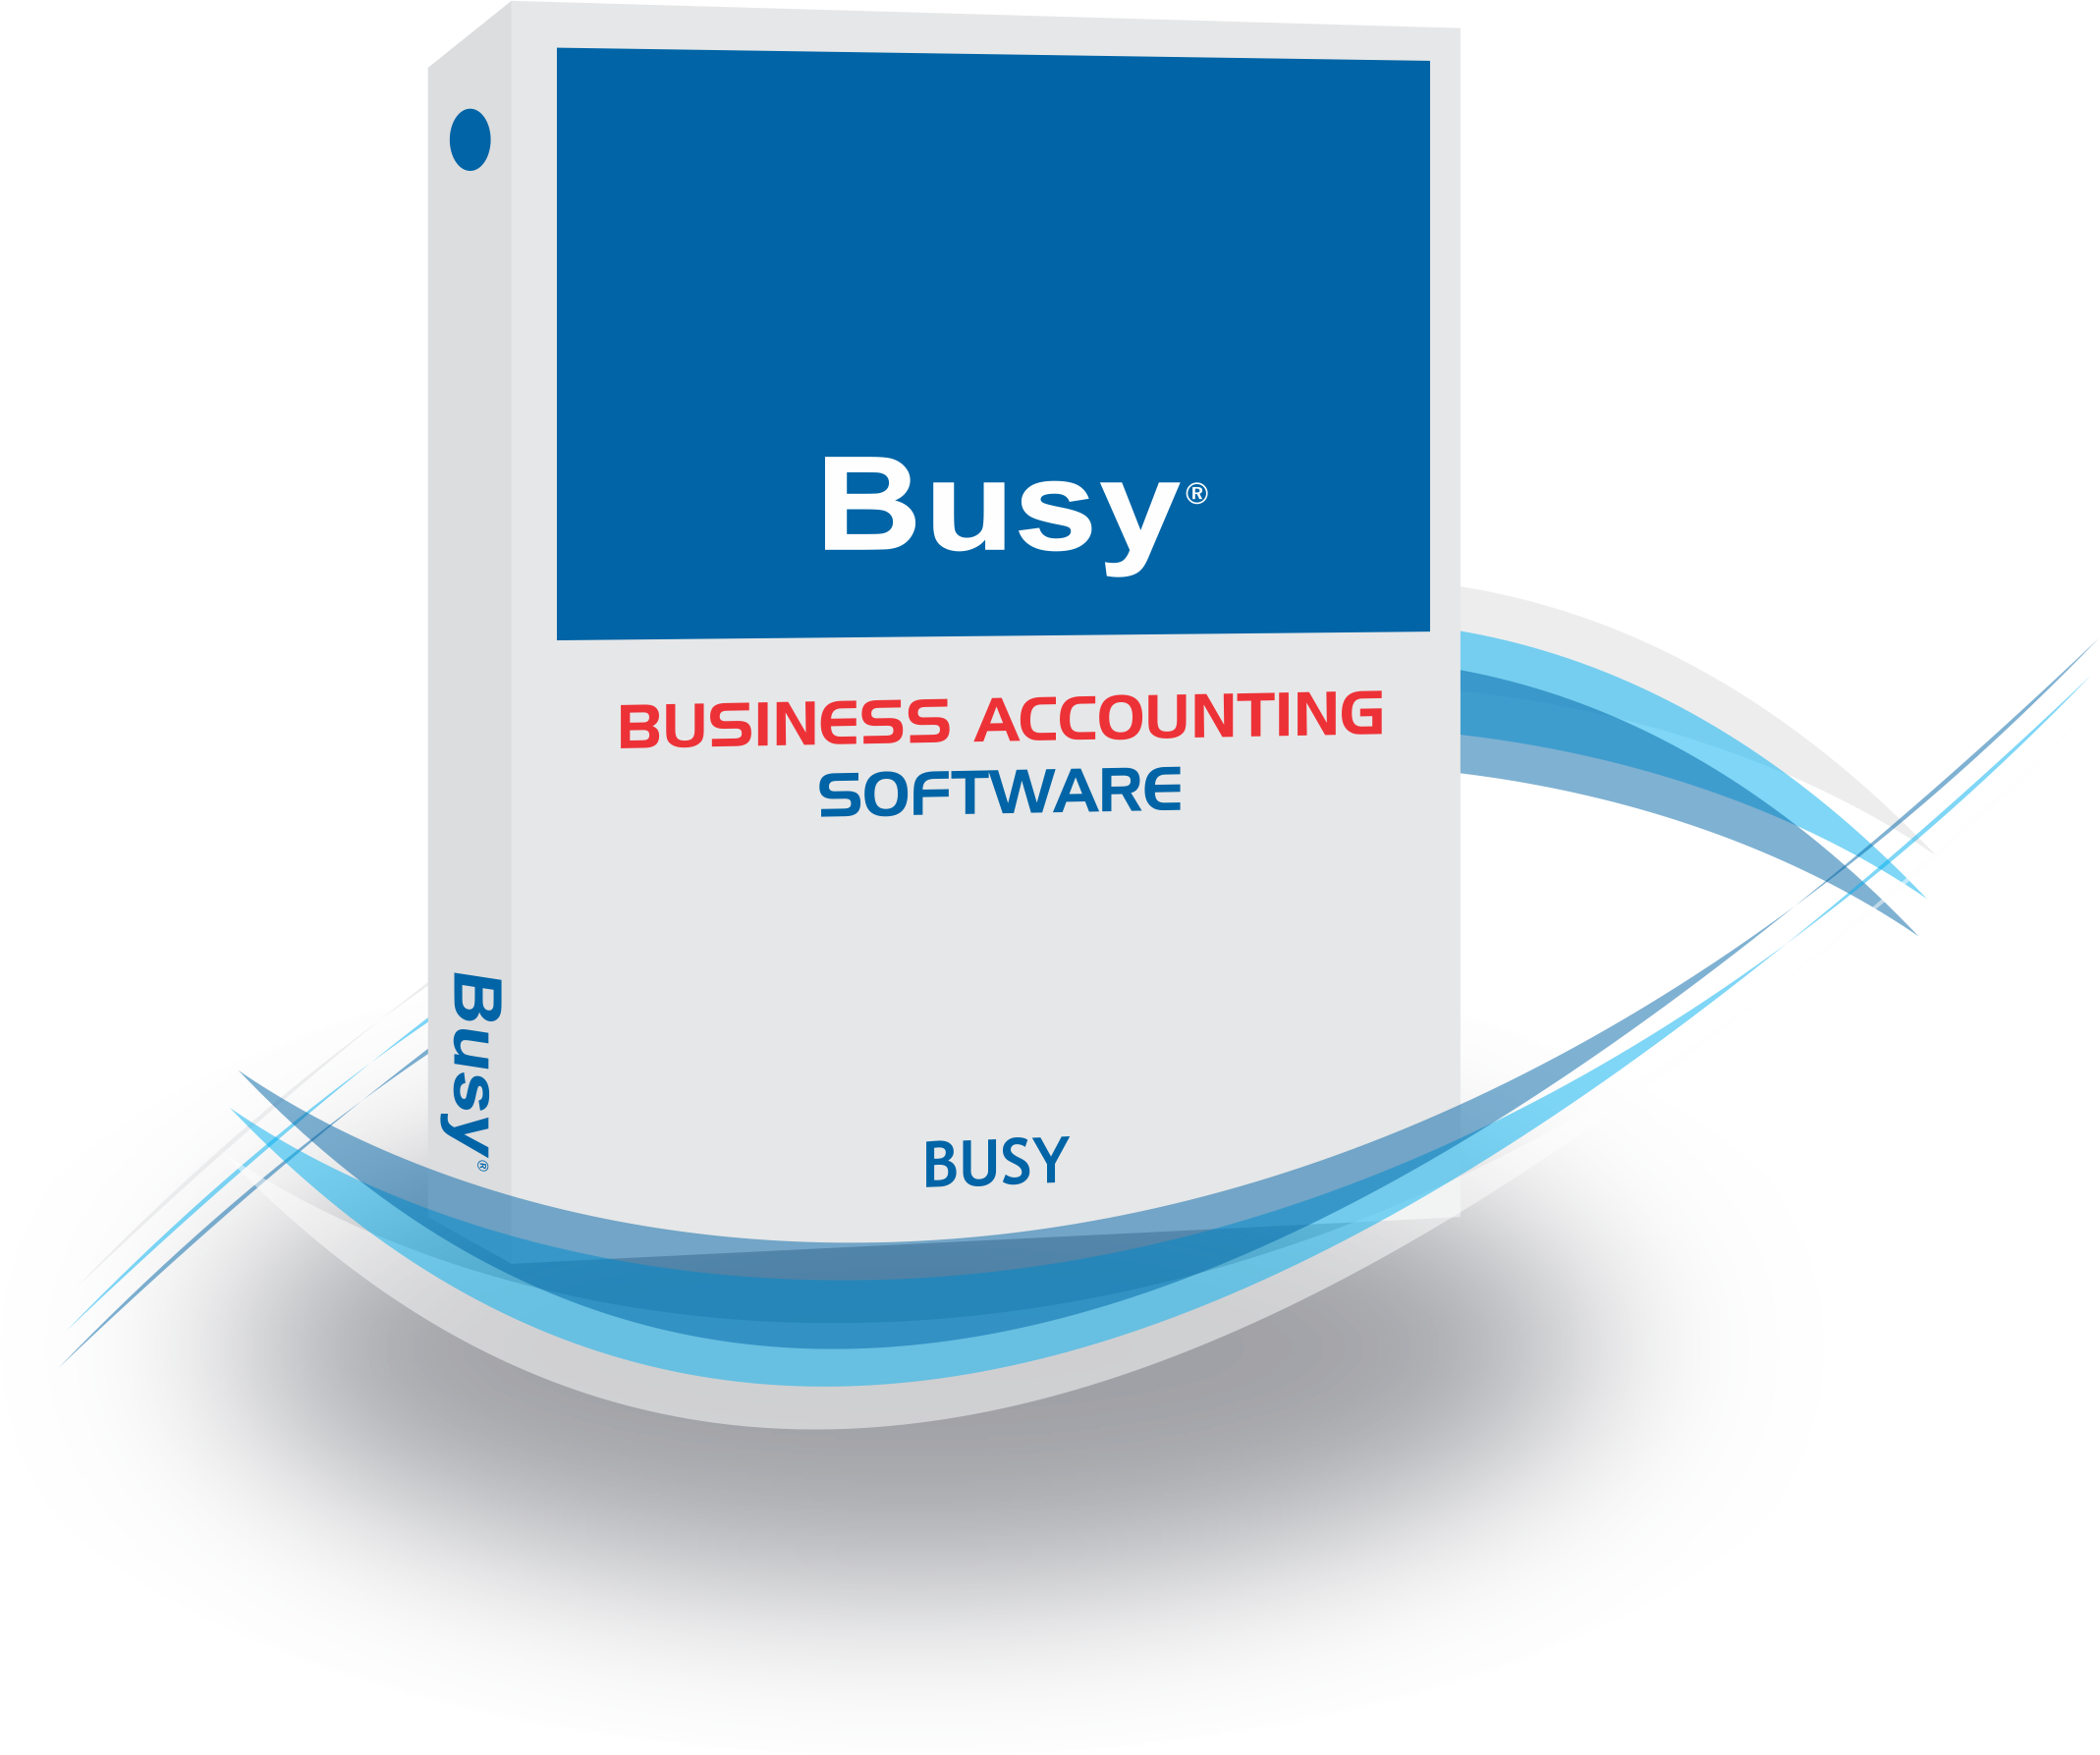 Busy Accounting Software